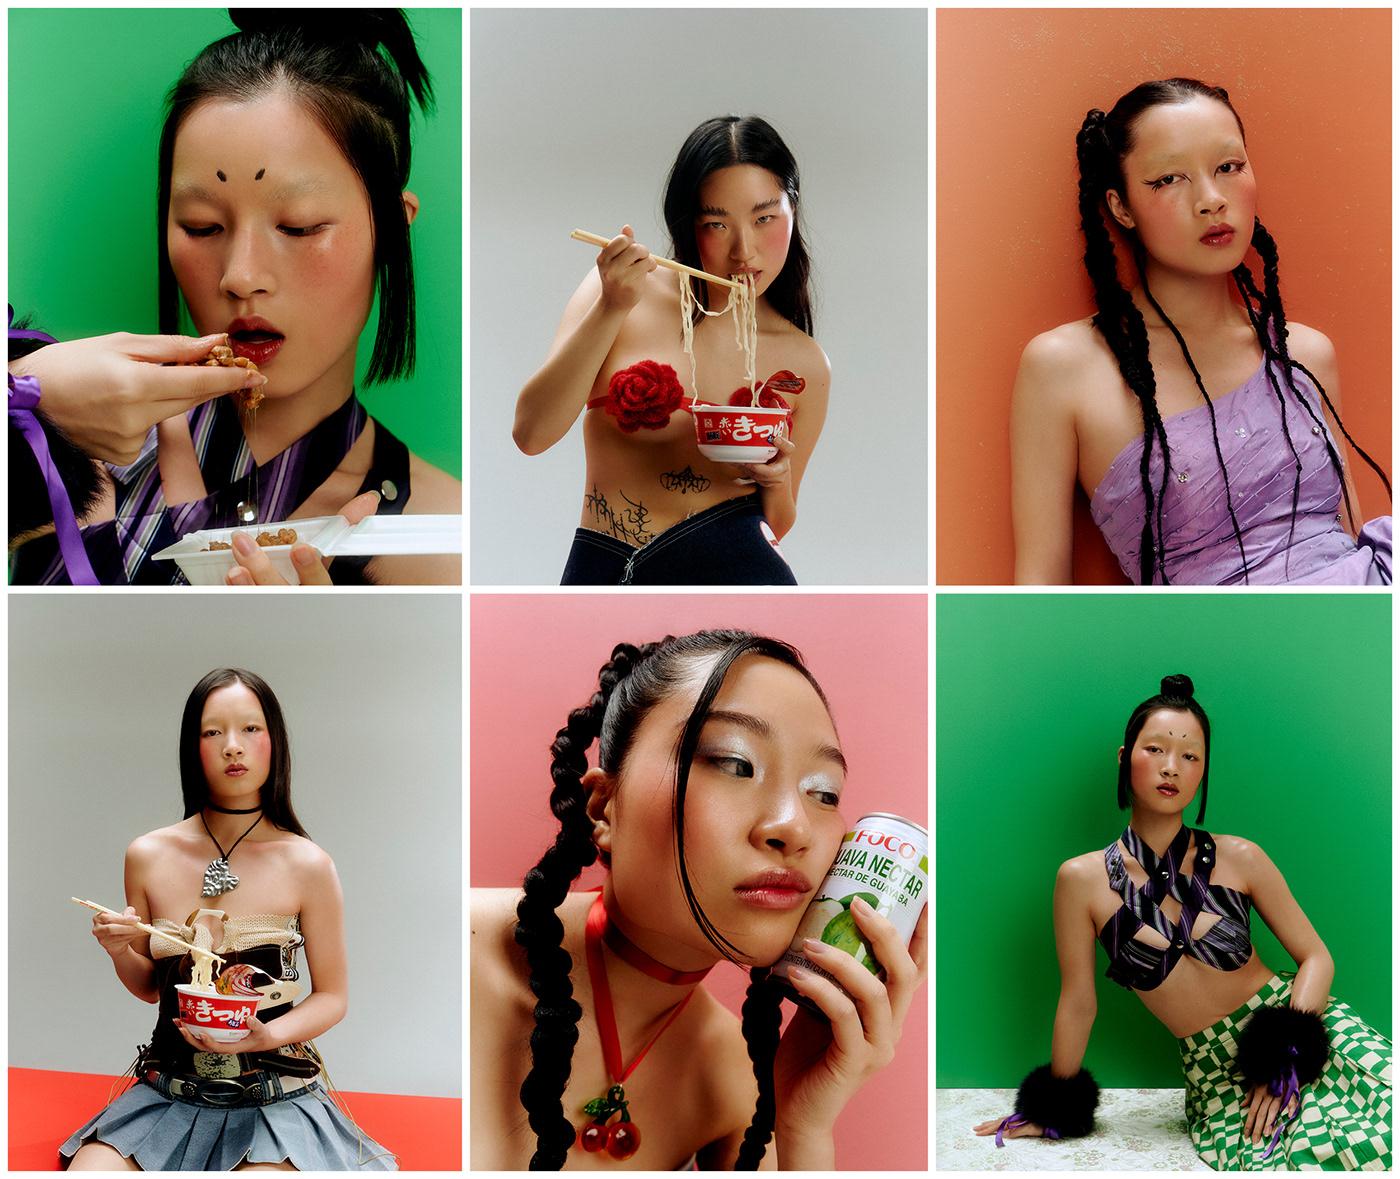 asian girl beauty editorial fashion editorial fashion photography food photography lighting Make Up photoshoot snack